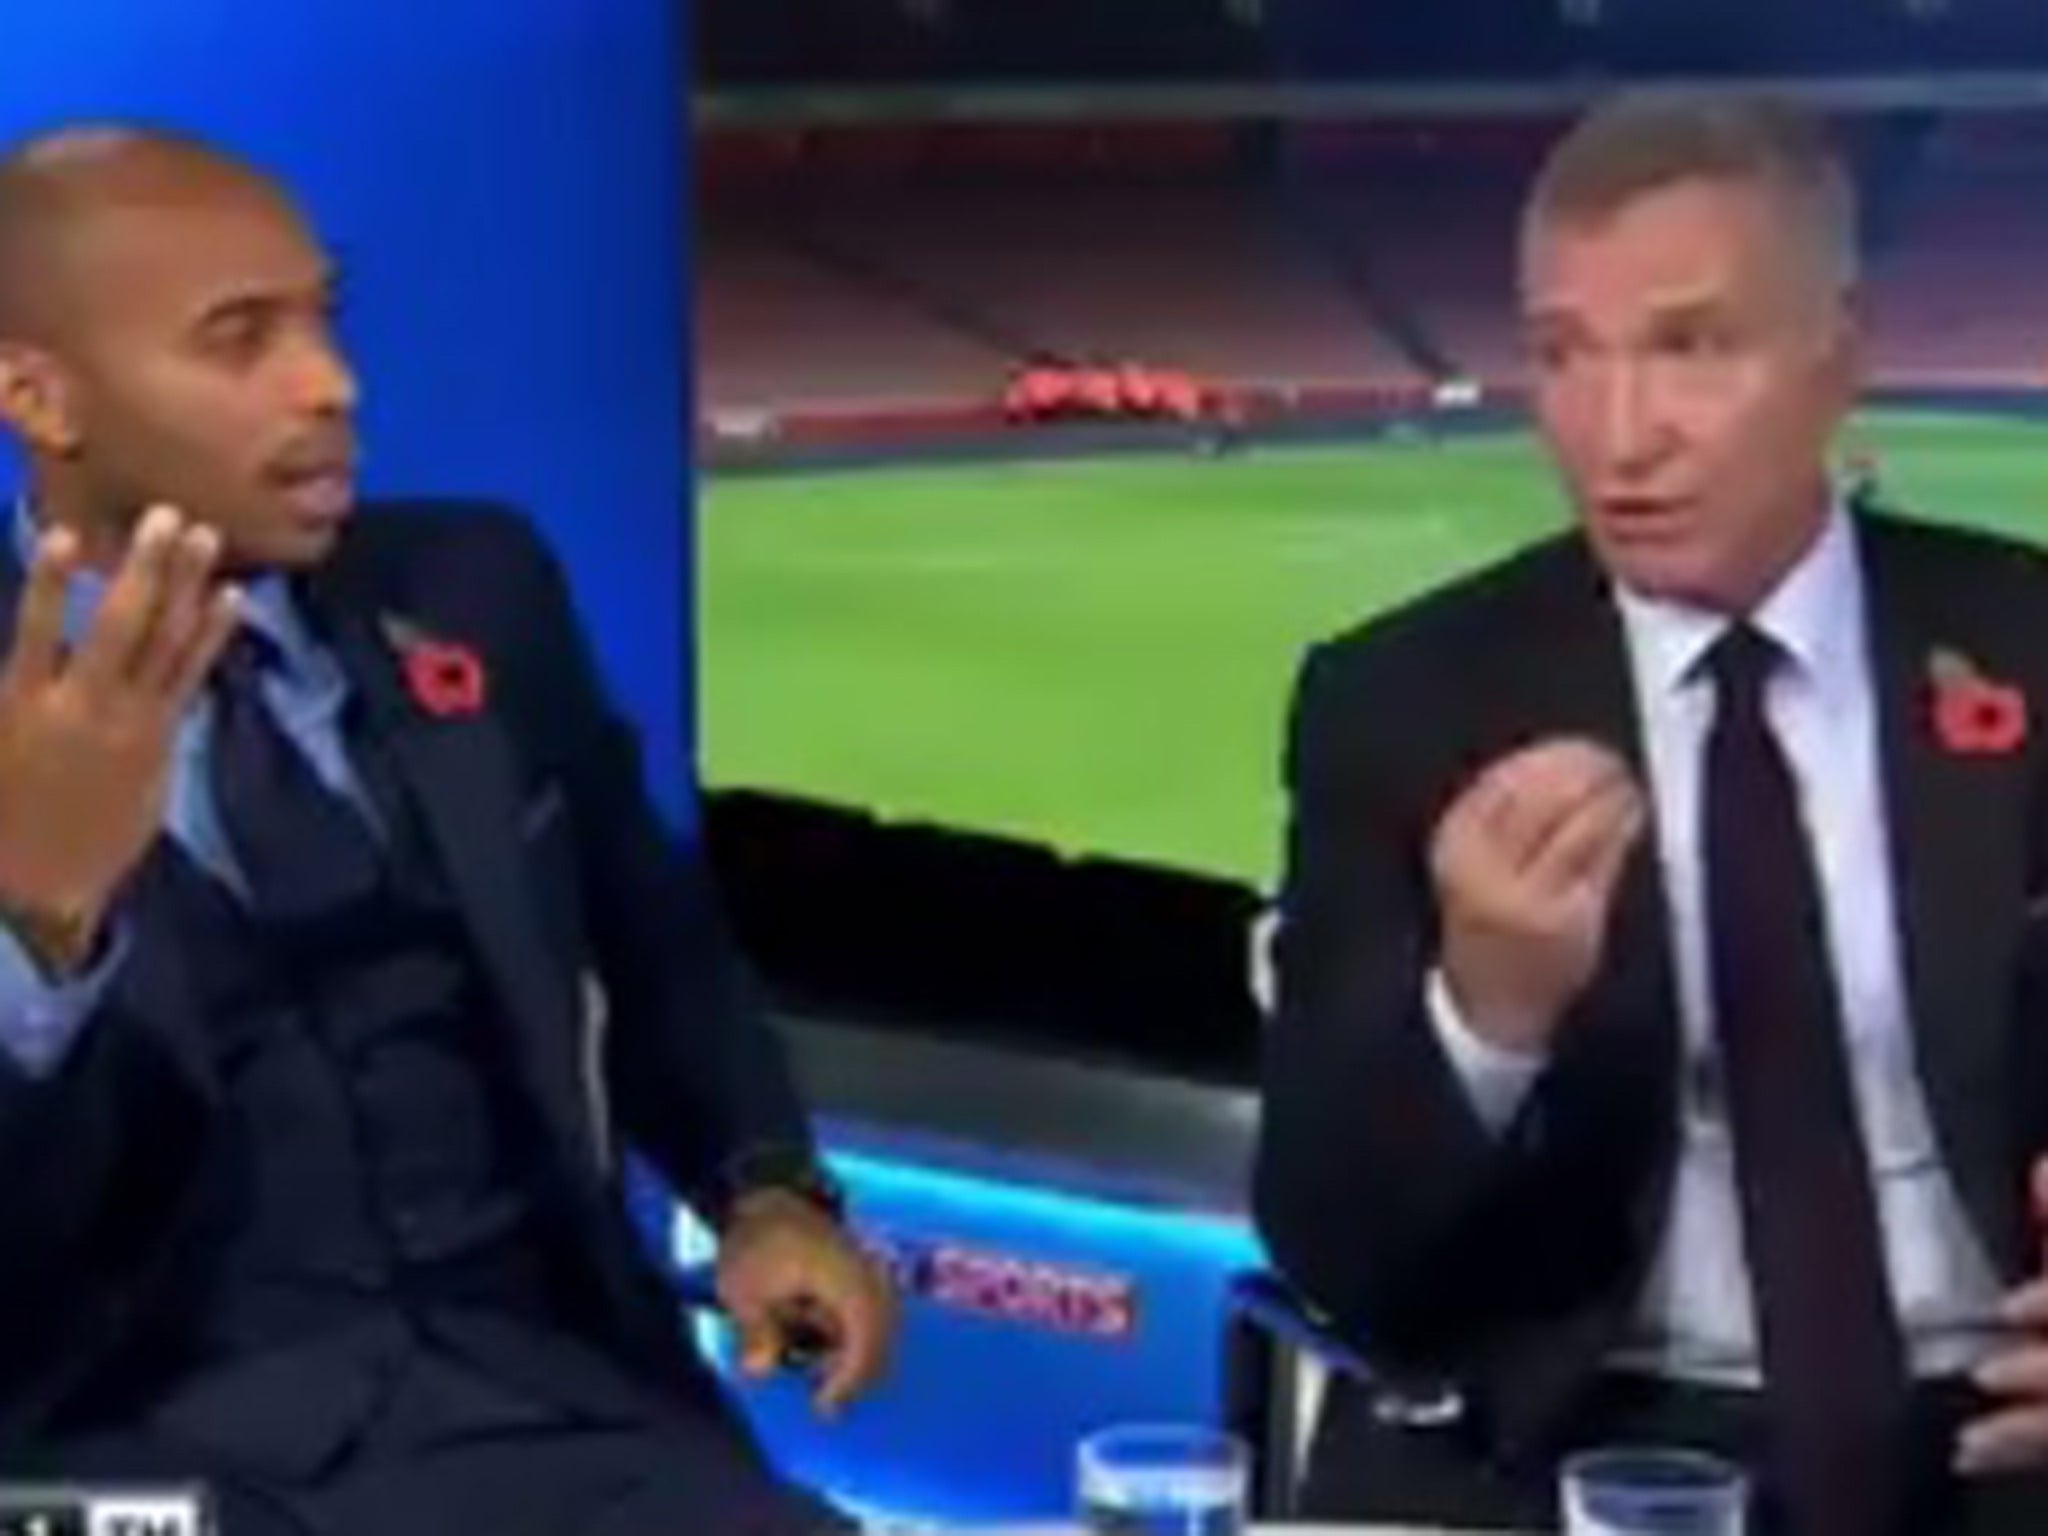 Theirry Henry and Graeme Souness during the broadcast on Sunday